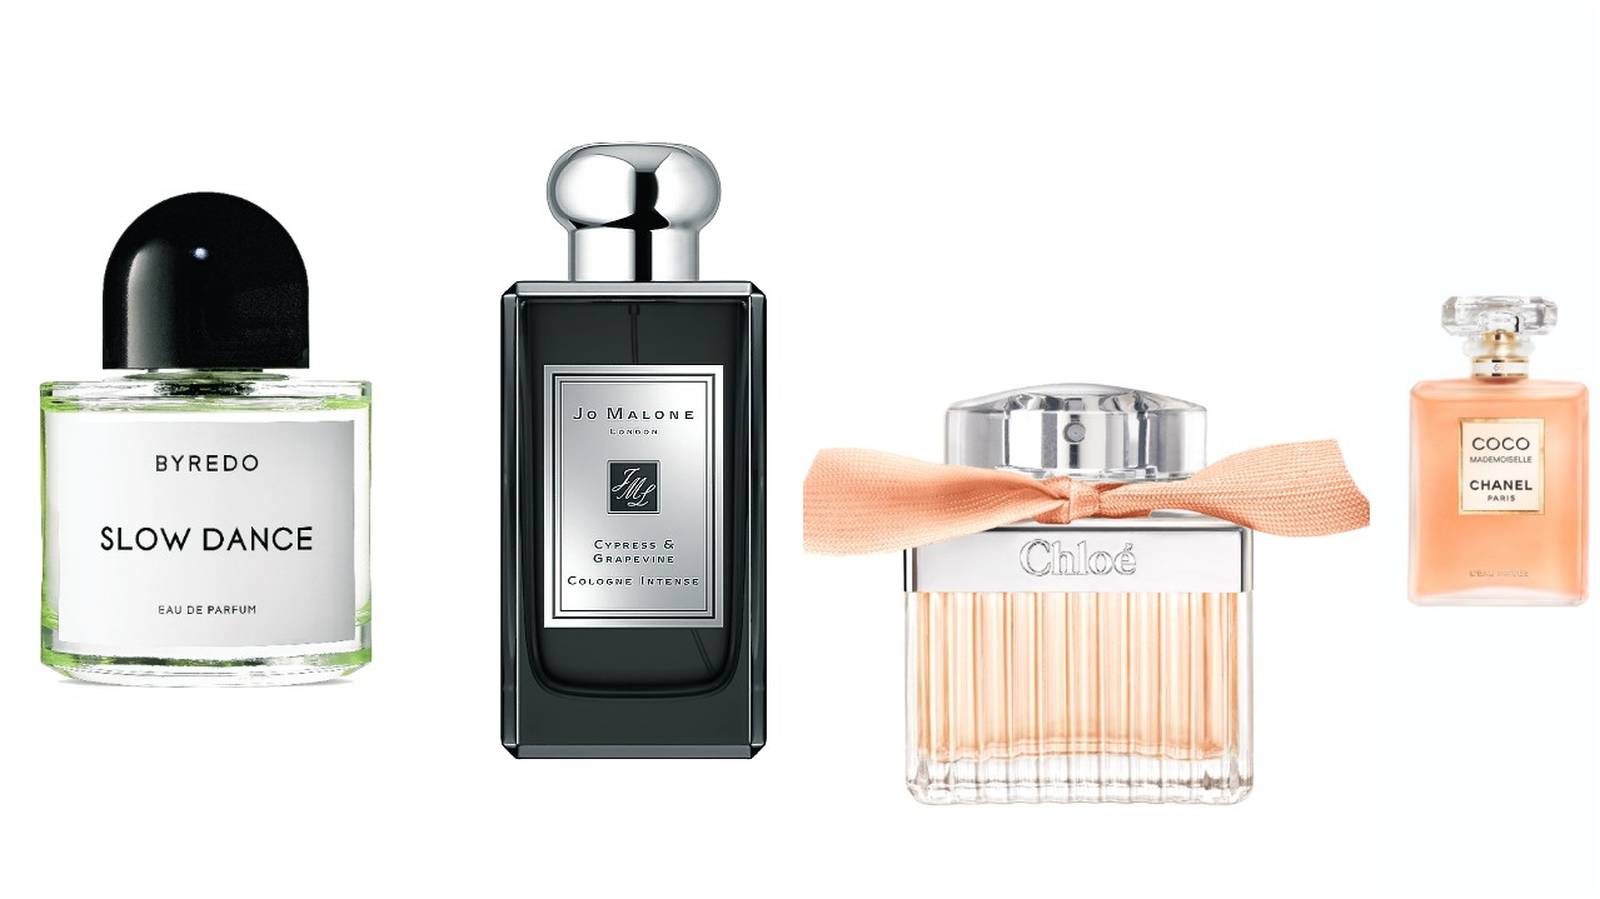 Heaven scent: It’s the best time of year to try a new fragrance – The ...